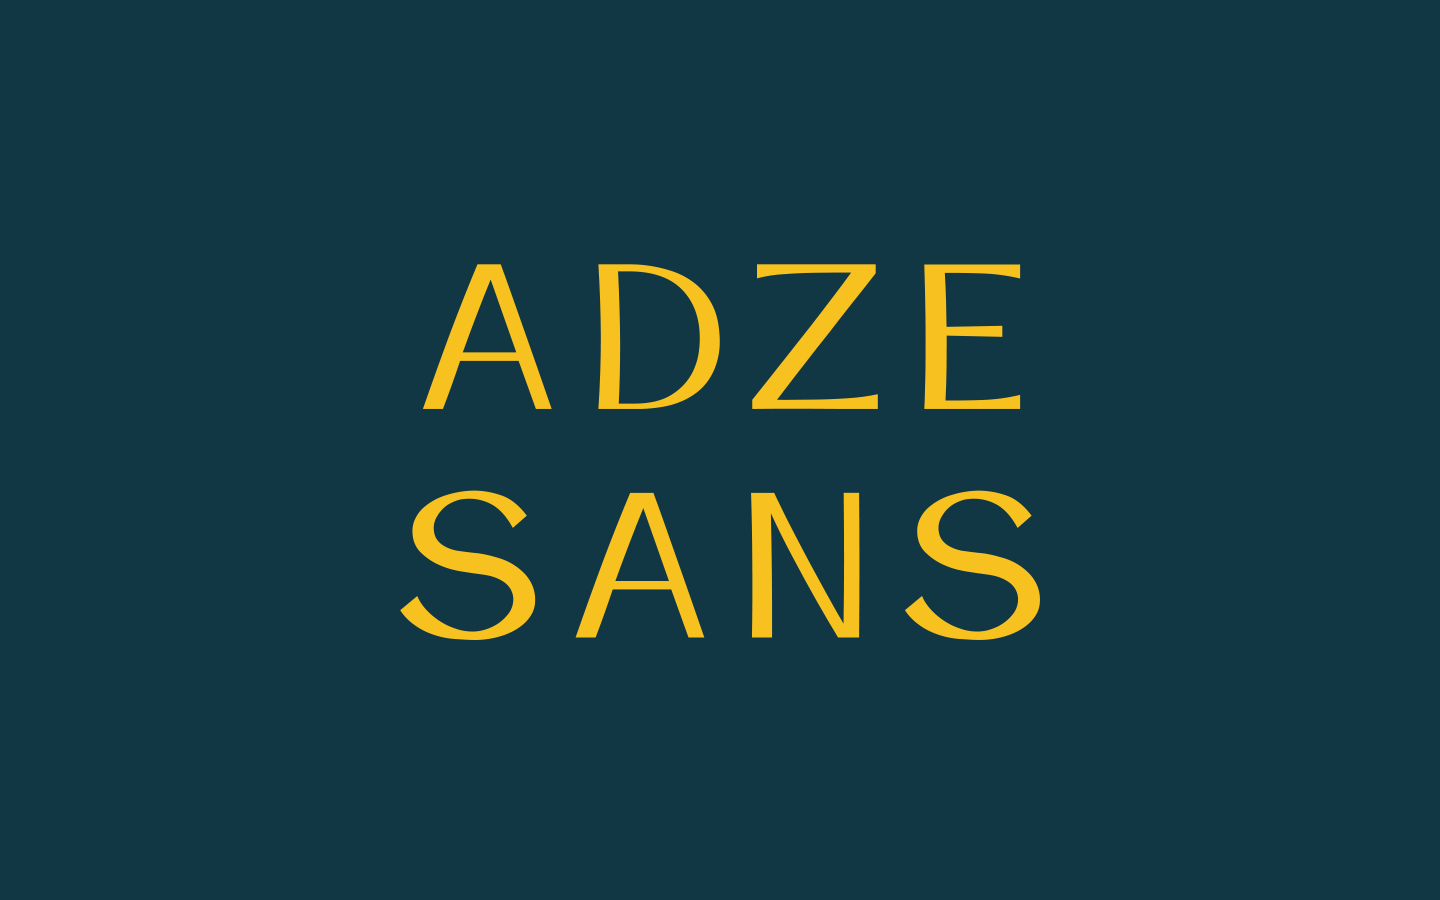 image of name of typeface Adze Sans